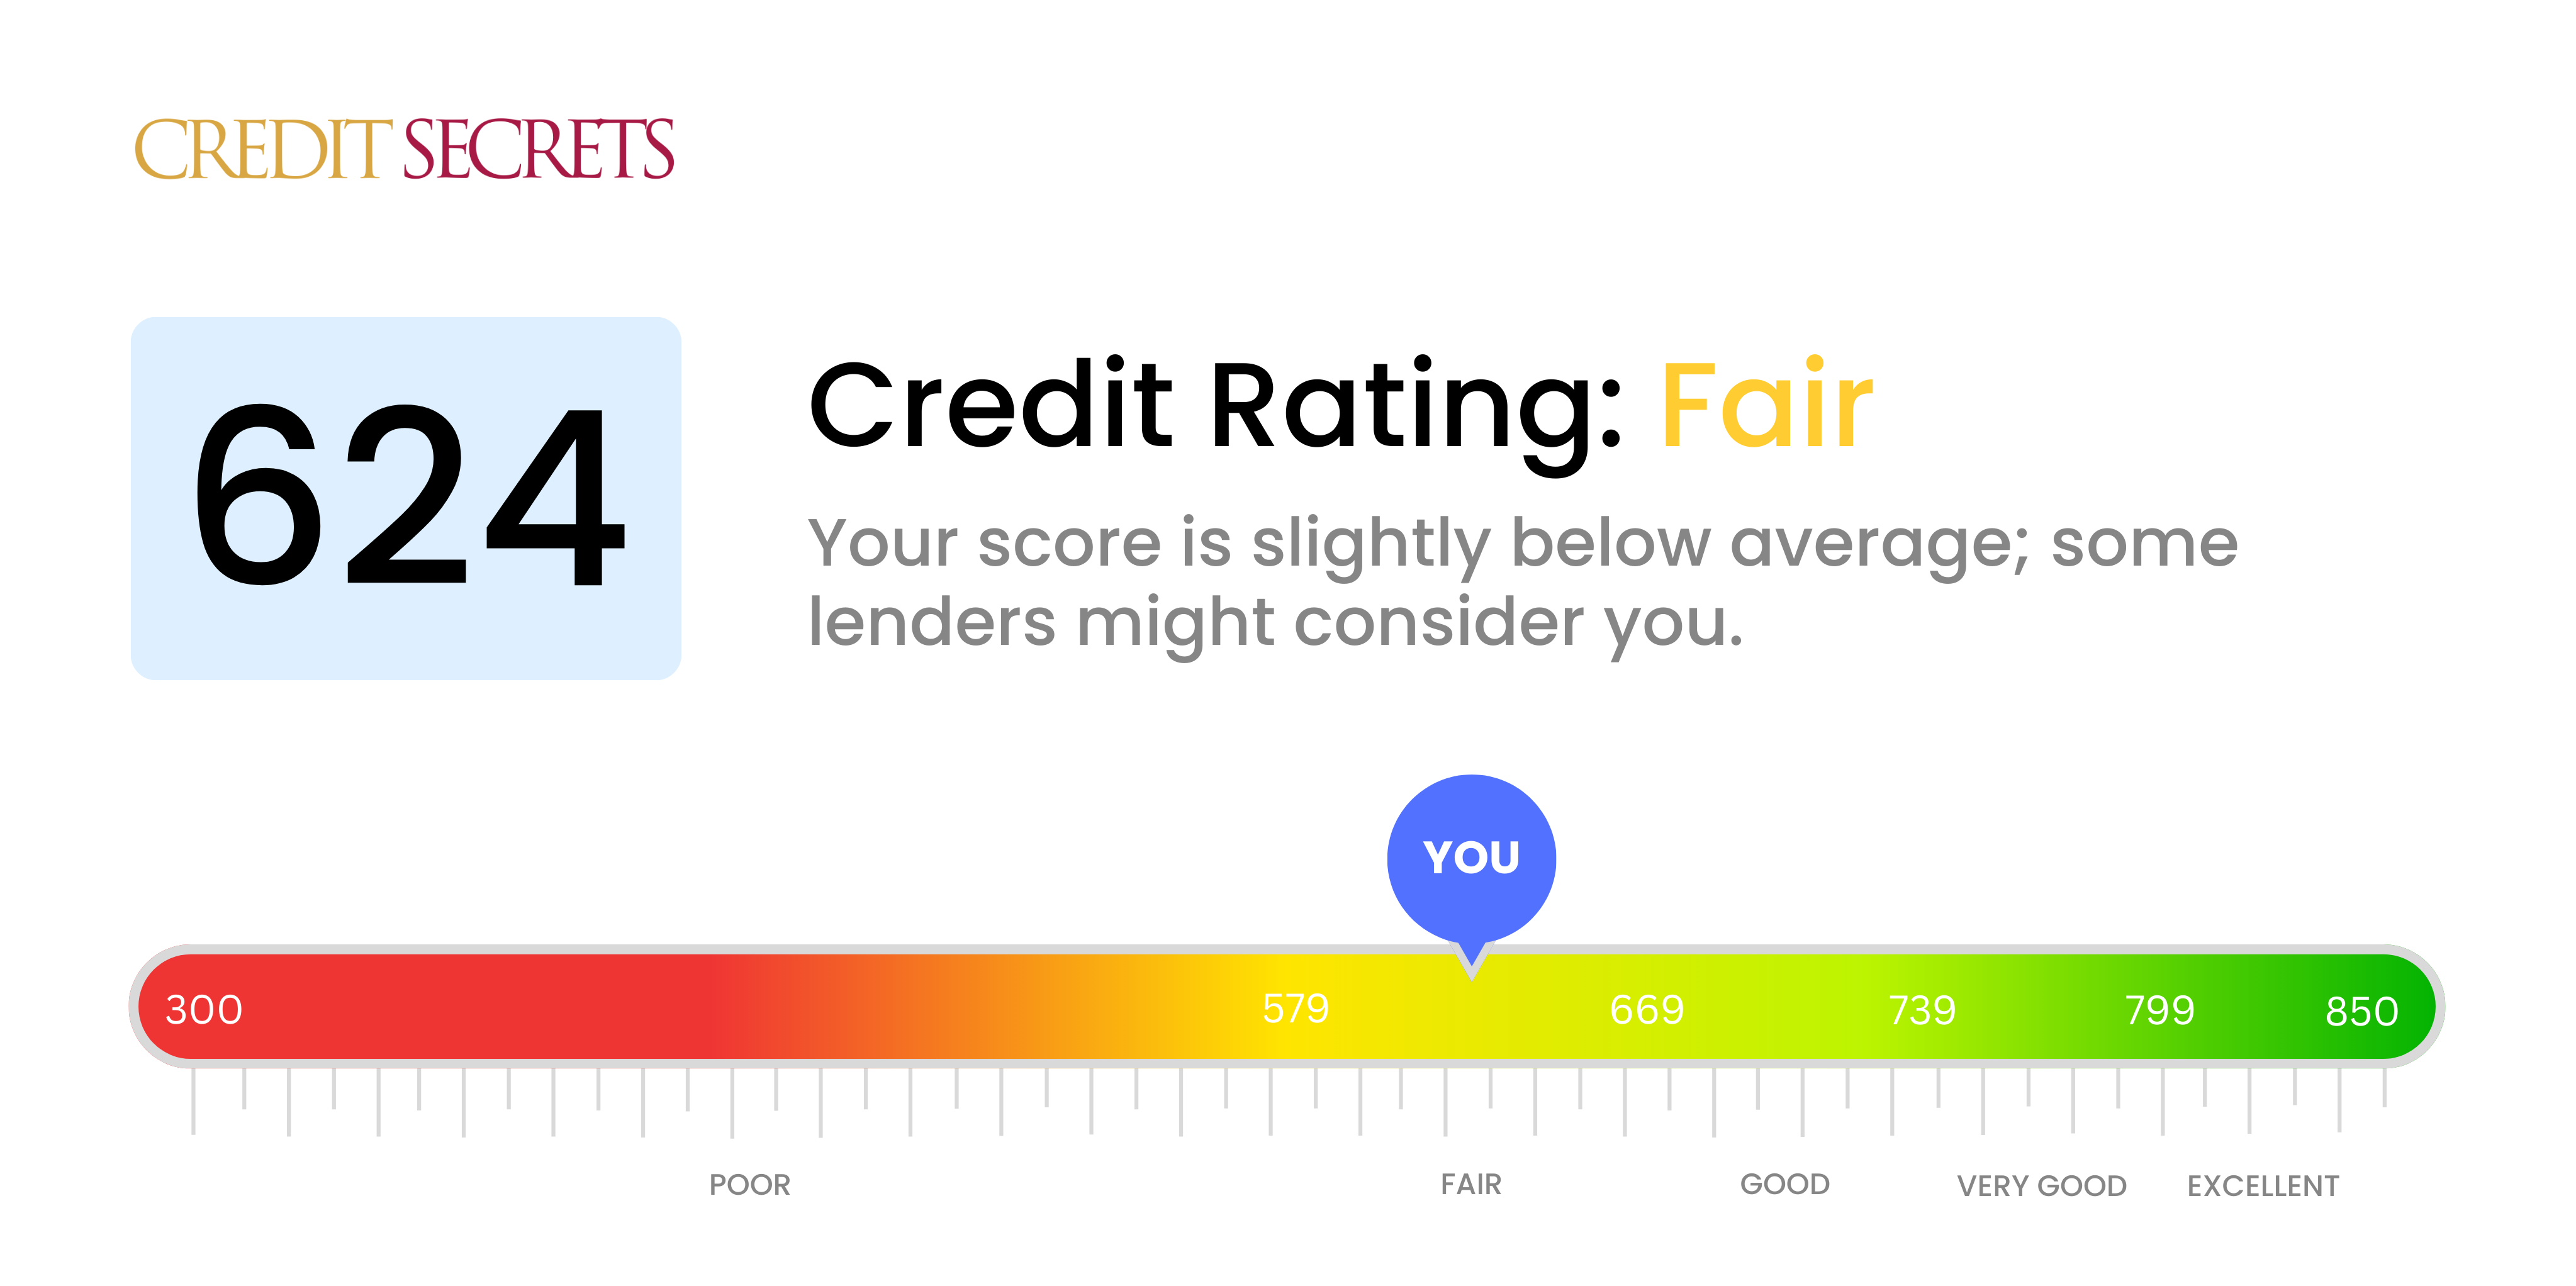 Is 624 a good credit score?